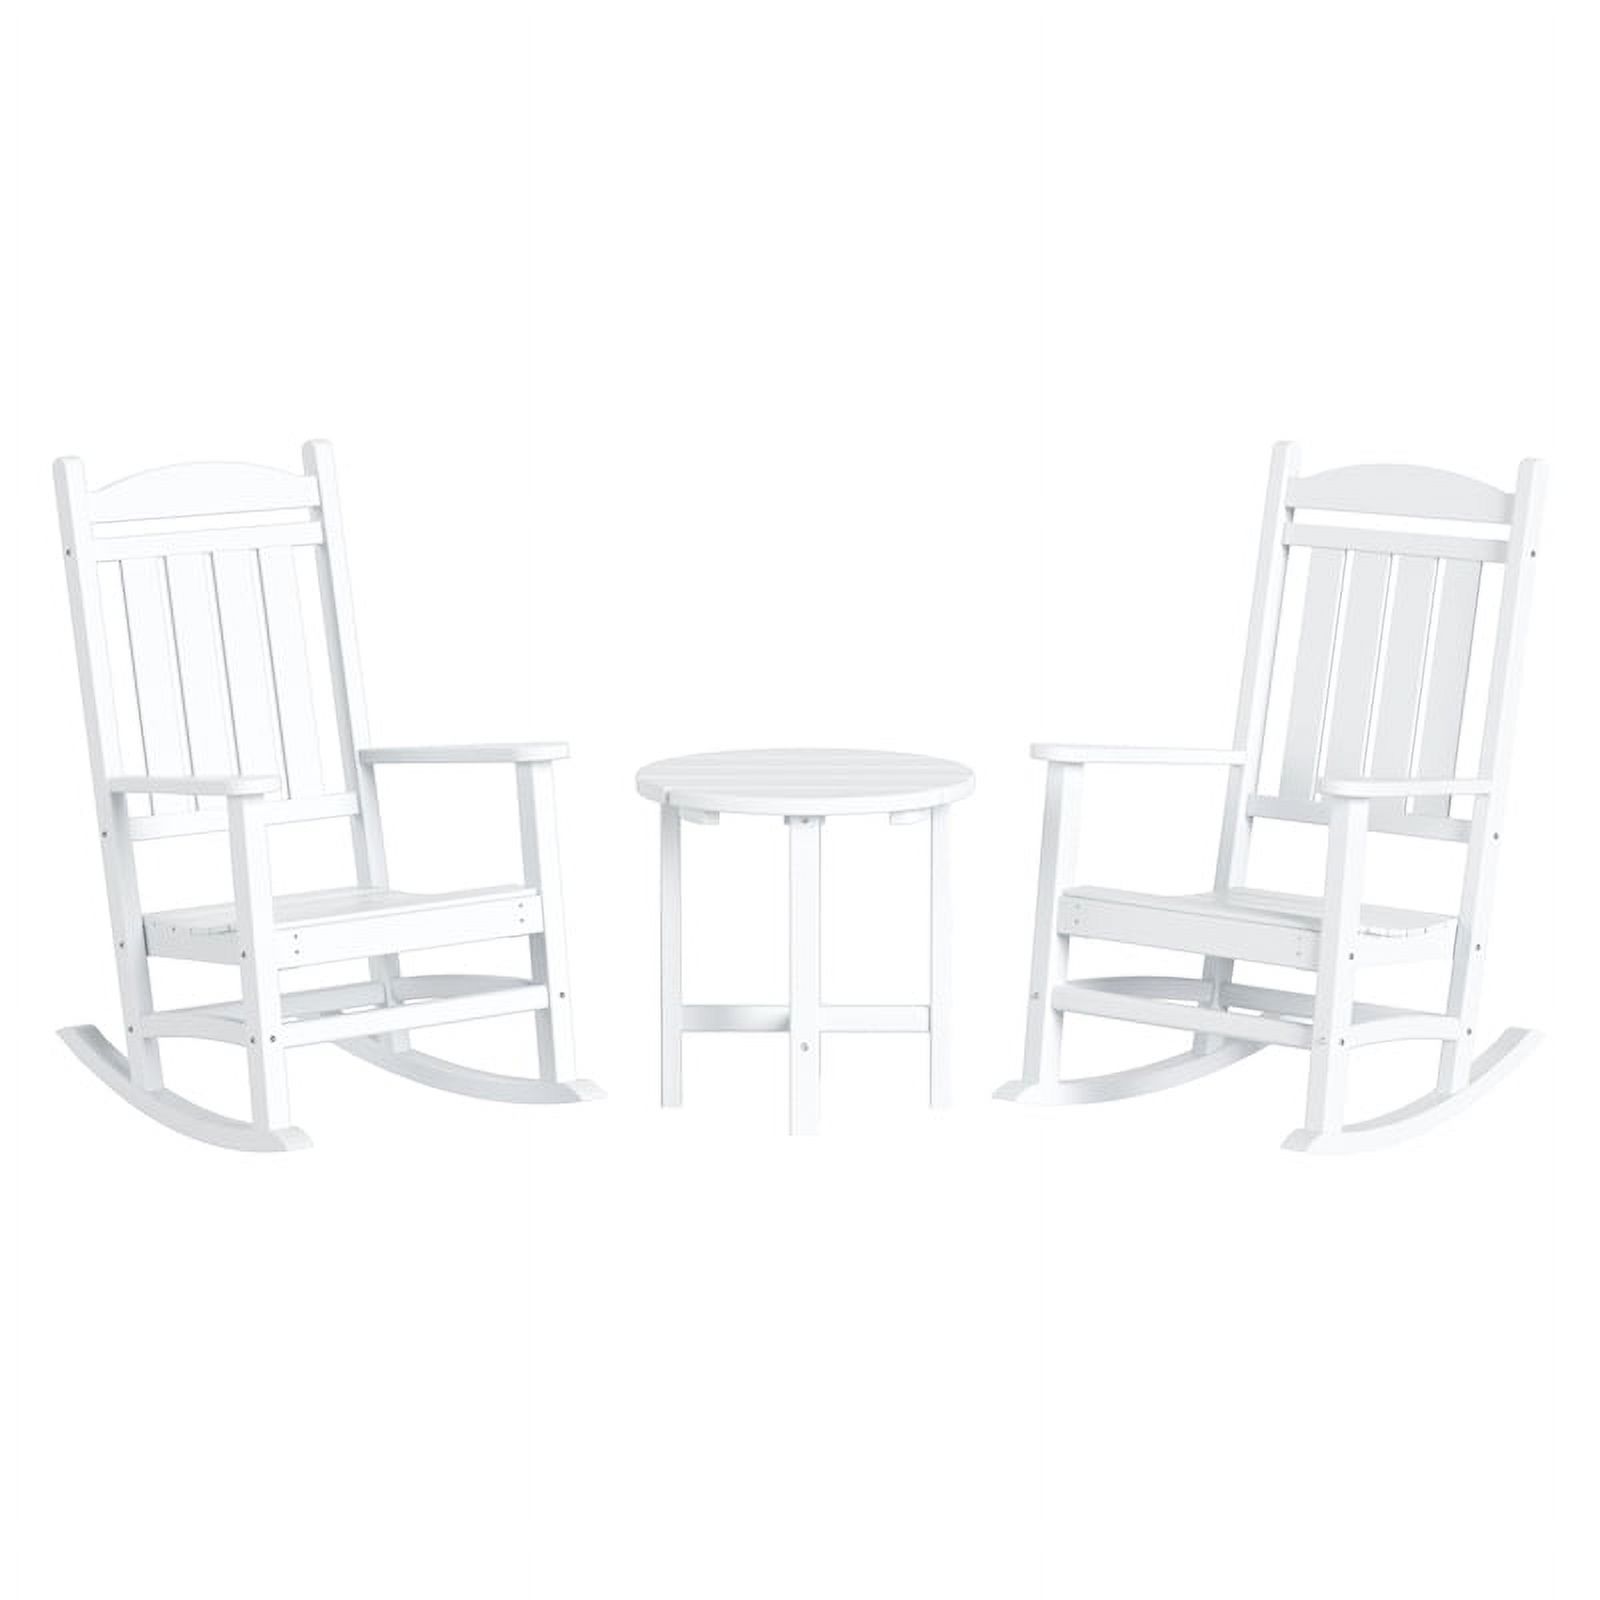 Hastings Classic Rocking Chair With Side Table 3-Piece Set - image 1 of 7